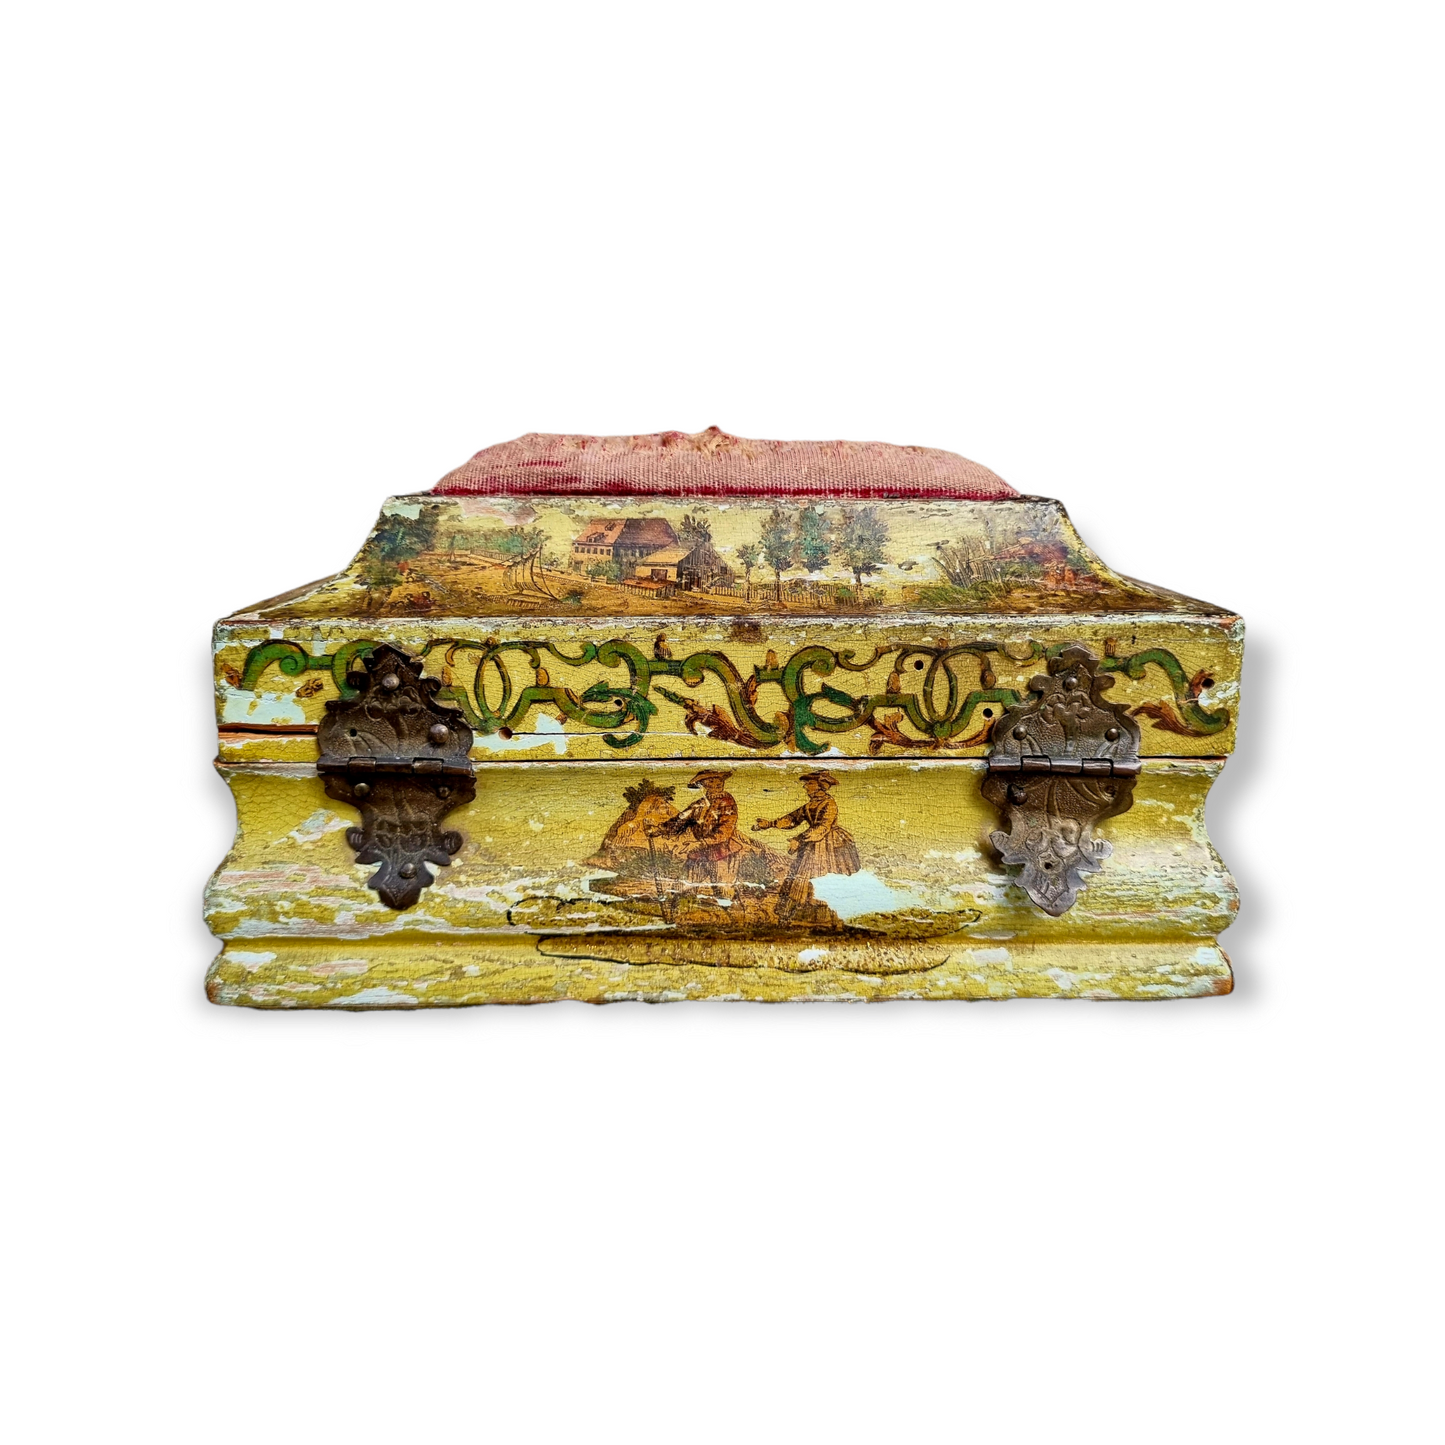 18th Century Italian Antique Box With Decoupage Decoration And Pincushion